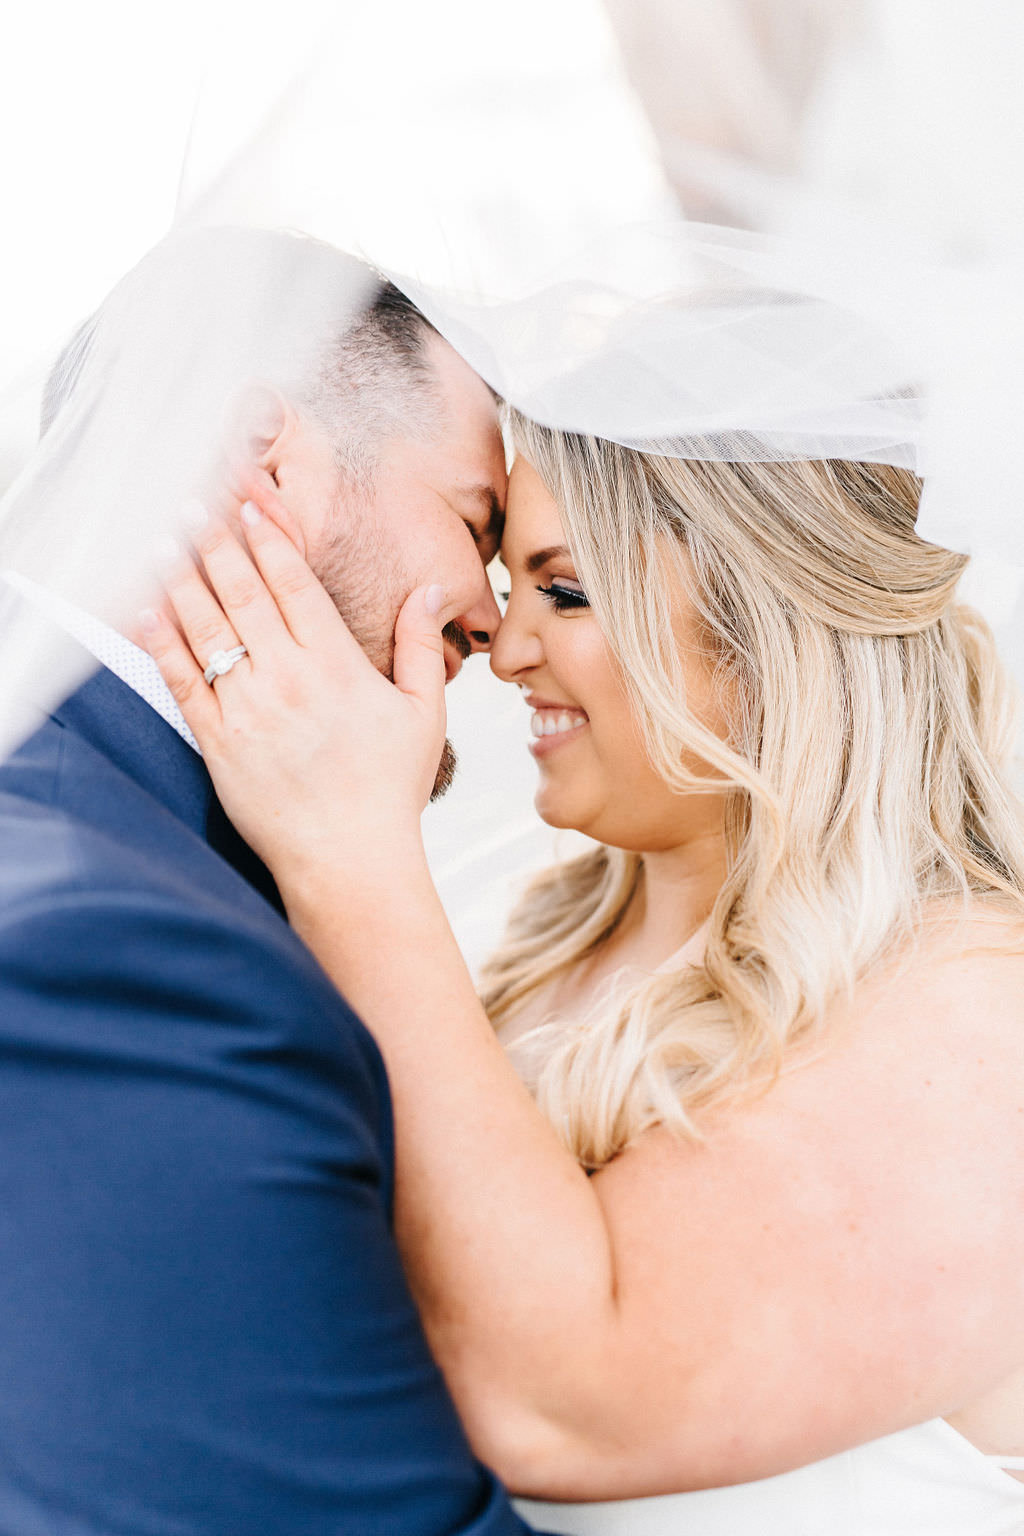 Tampa Bay Bride and Groom Intimate Wedding Portrait with Veil